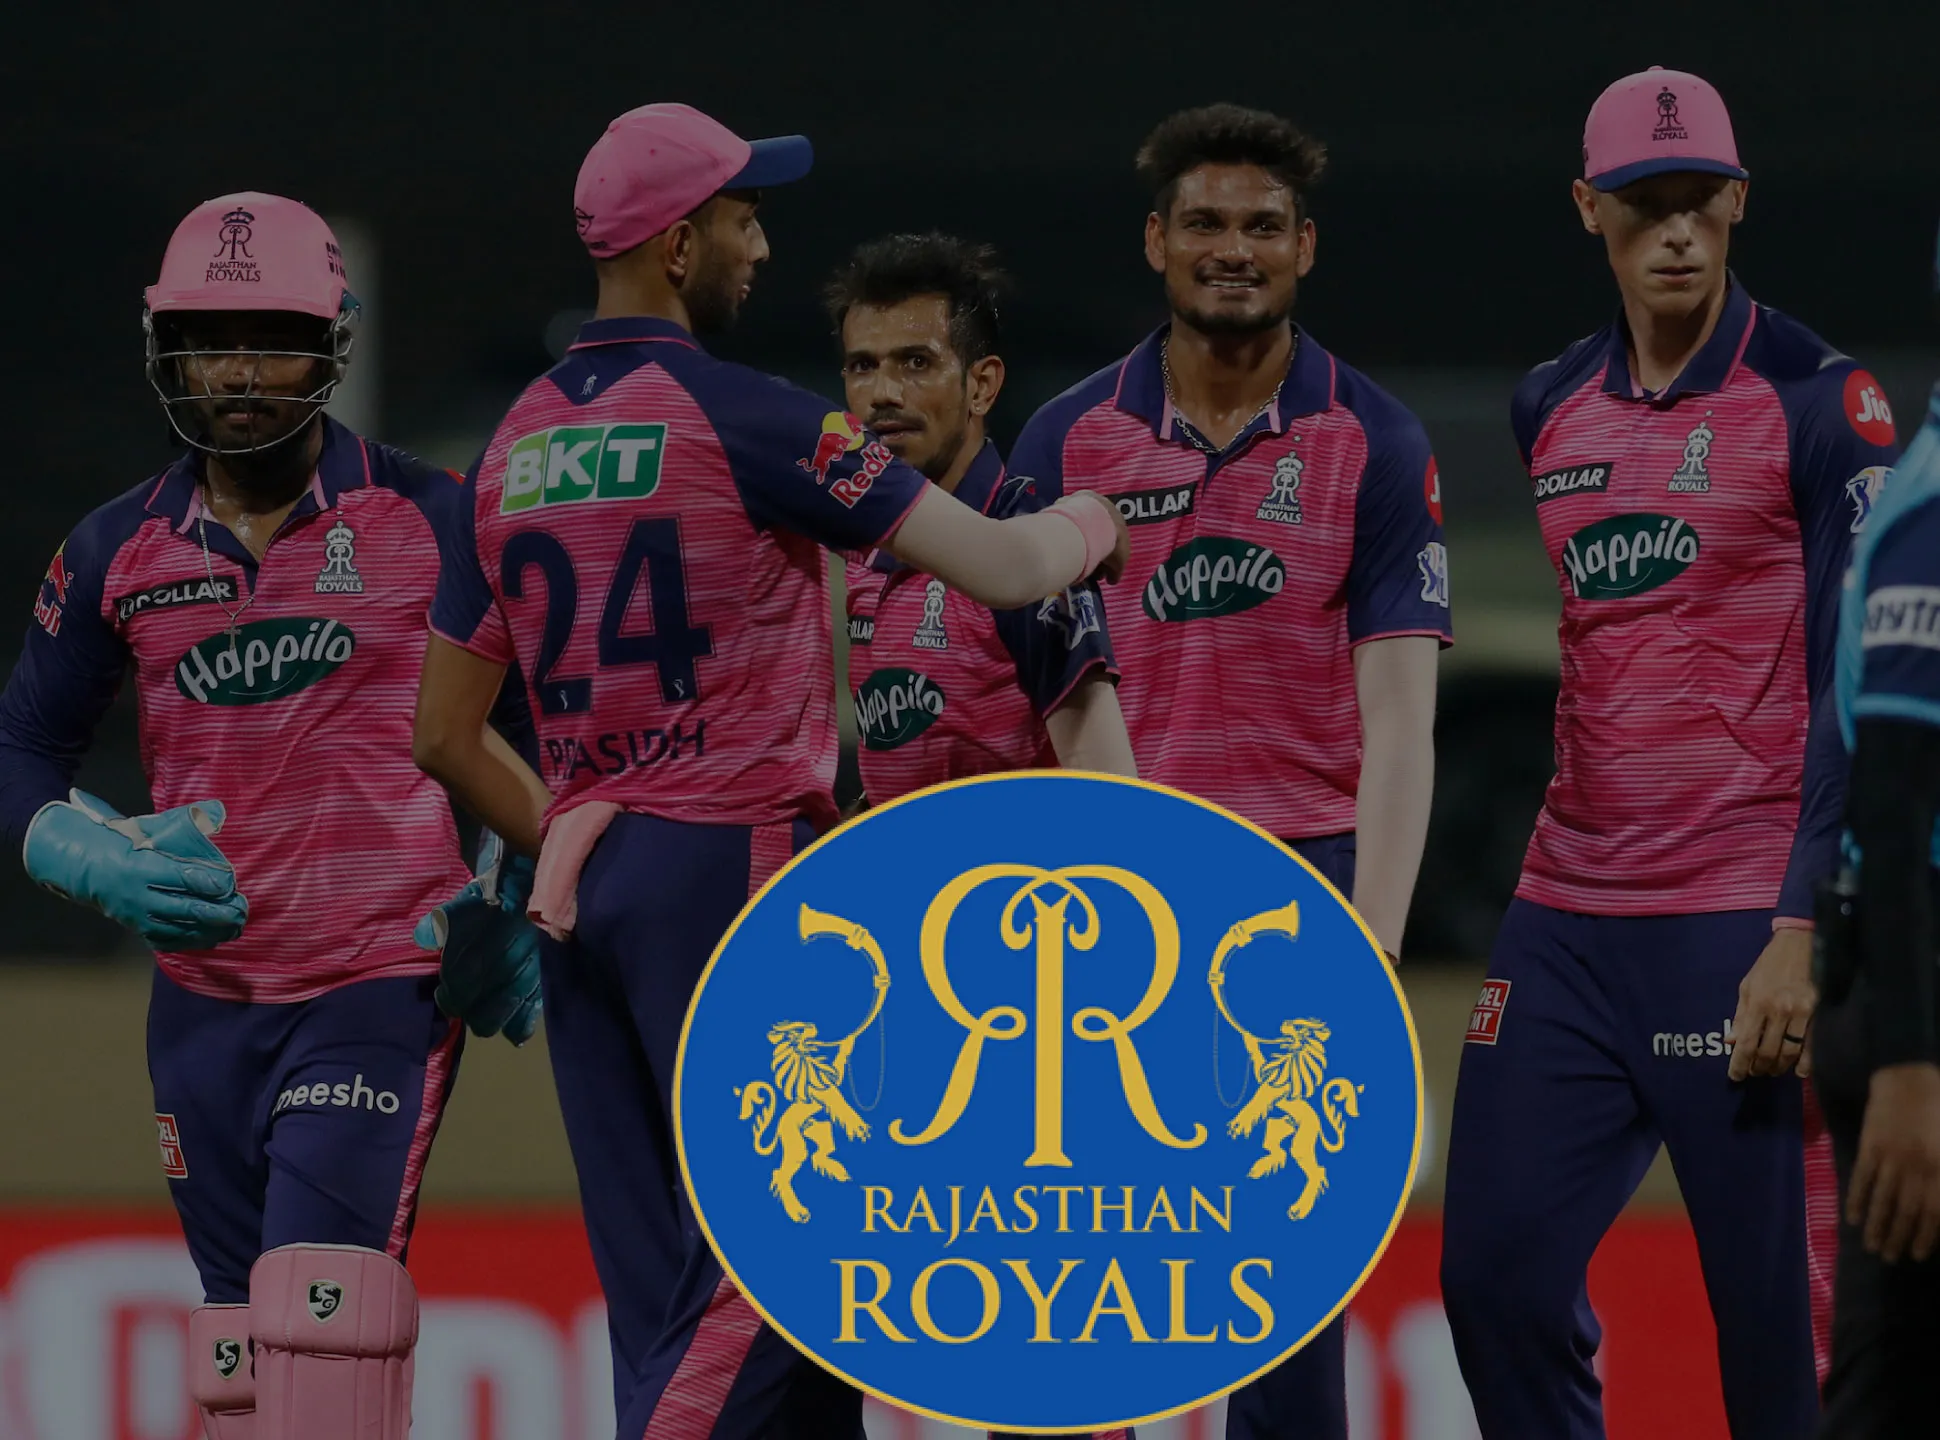 Since 2008 Rajasthan Royals is among the IPL teams.